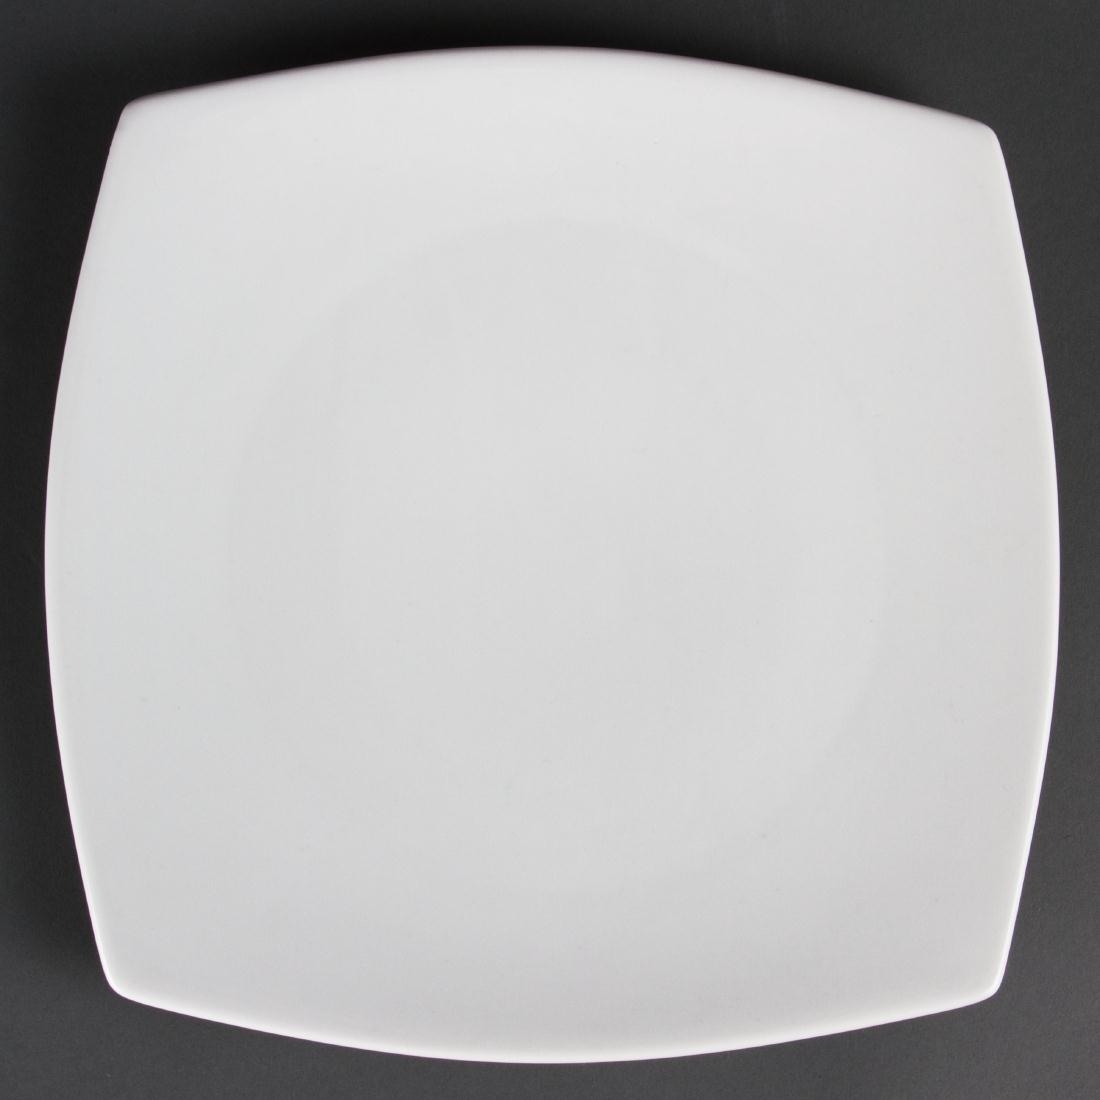 Olympia Whiteware Rounded Square Plates 270mm